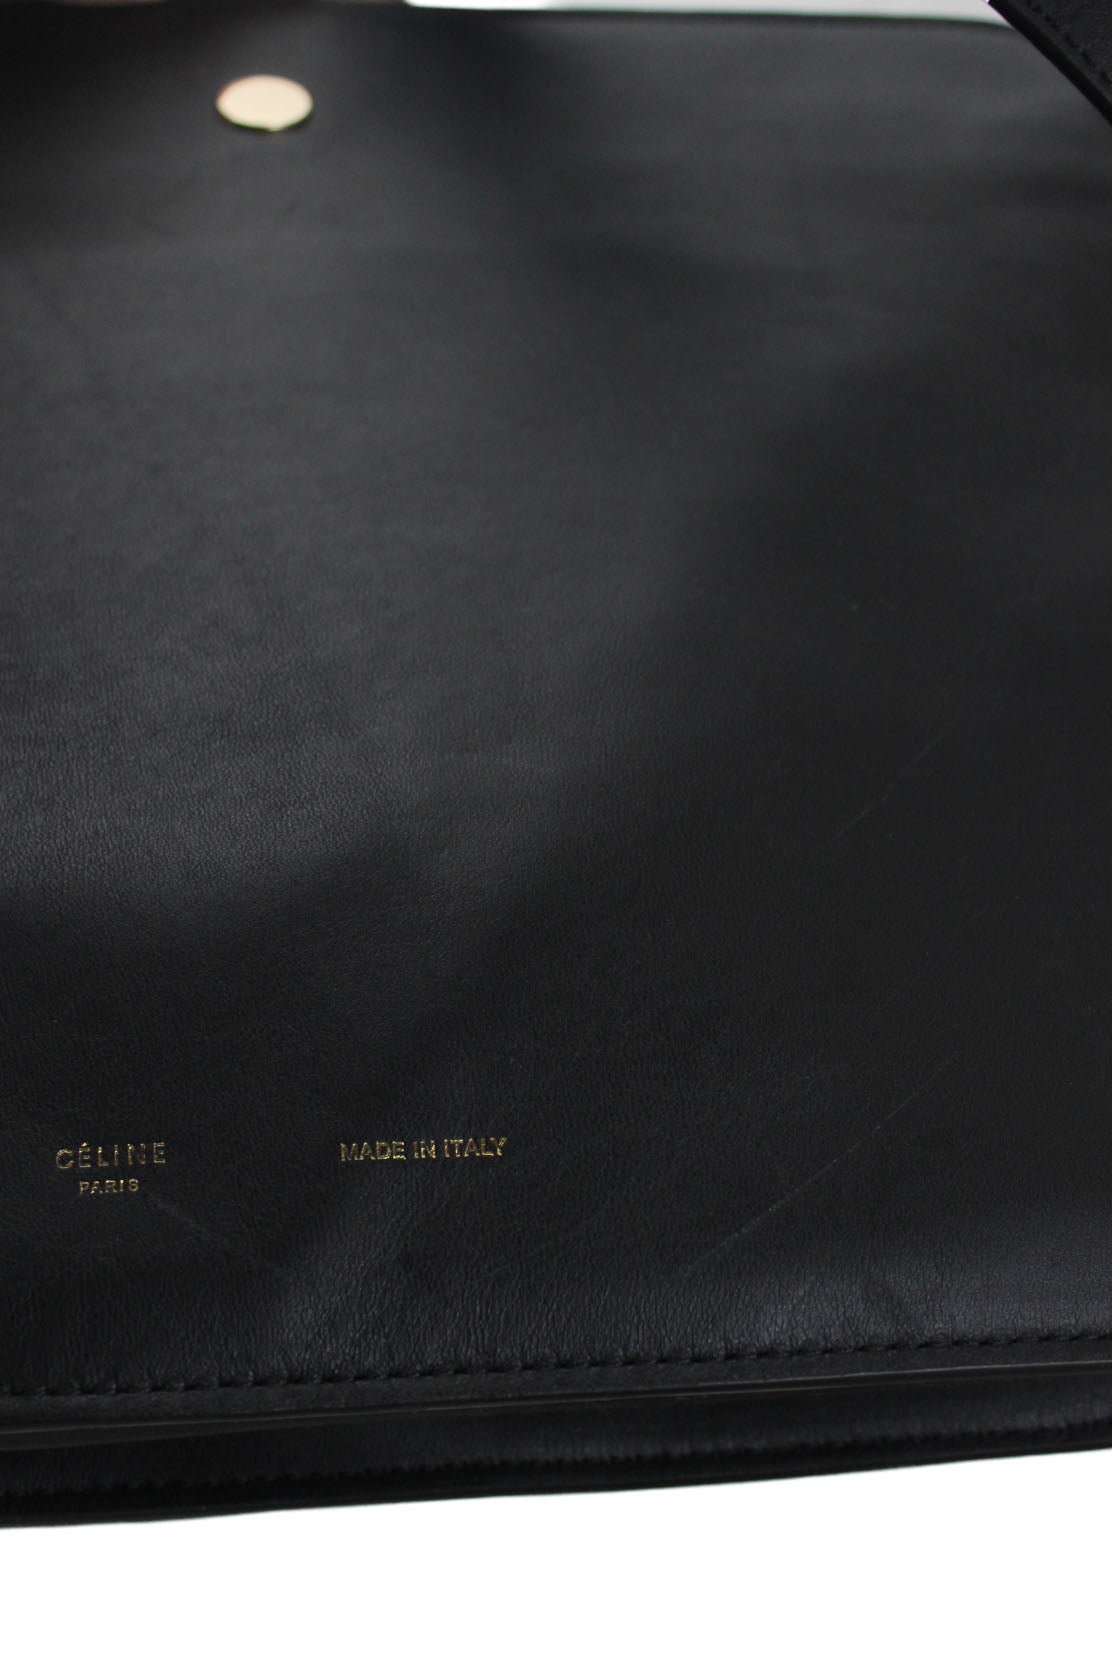 photo detail of bag. showing minor scratch.    